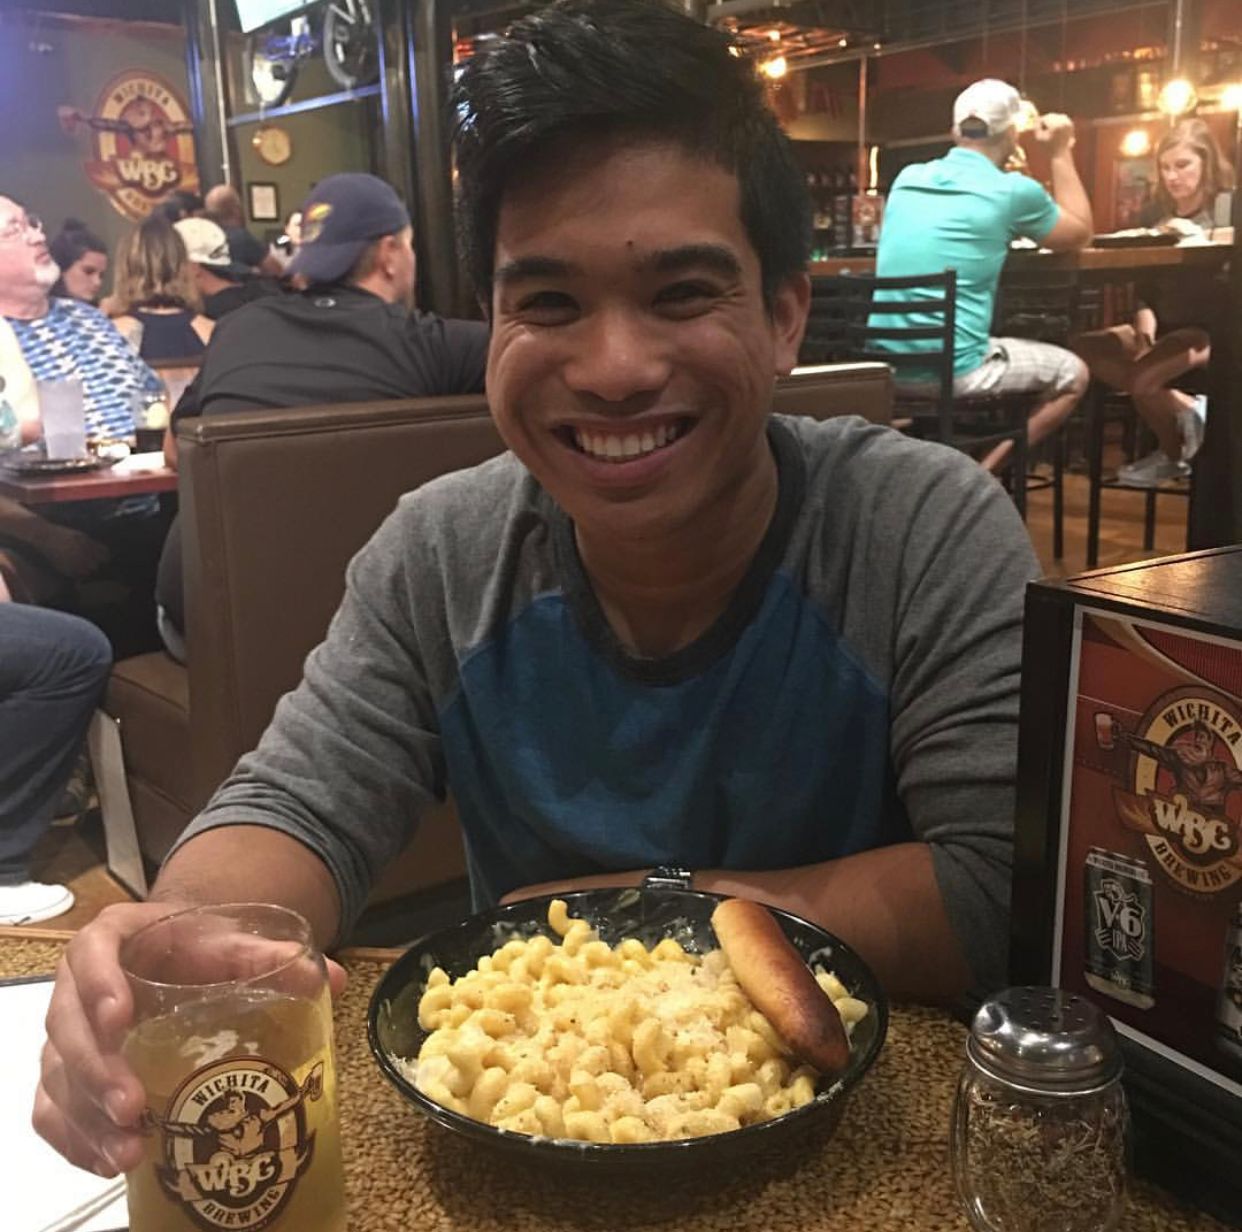 Student shares love of cheese with the world